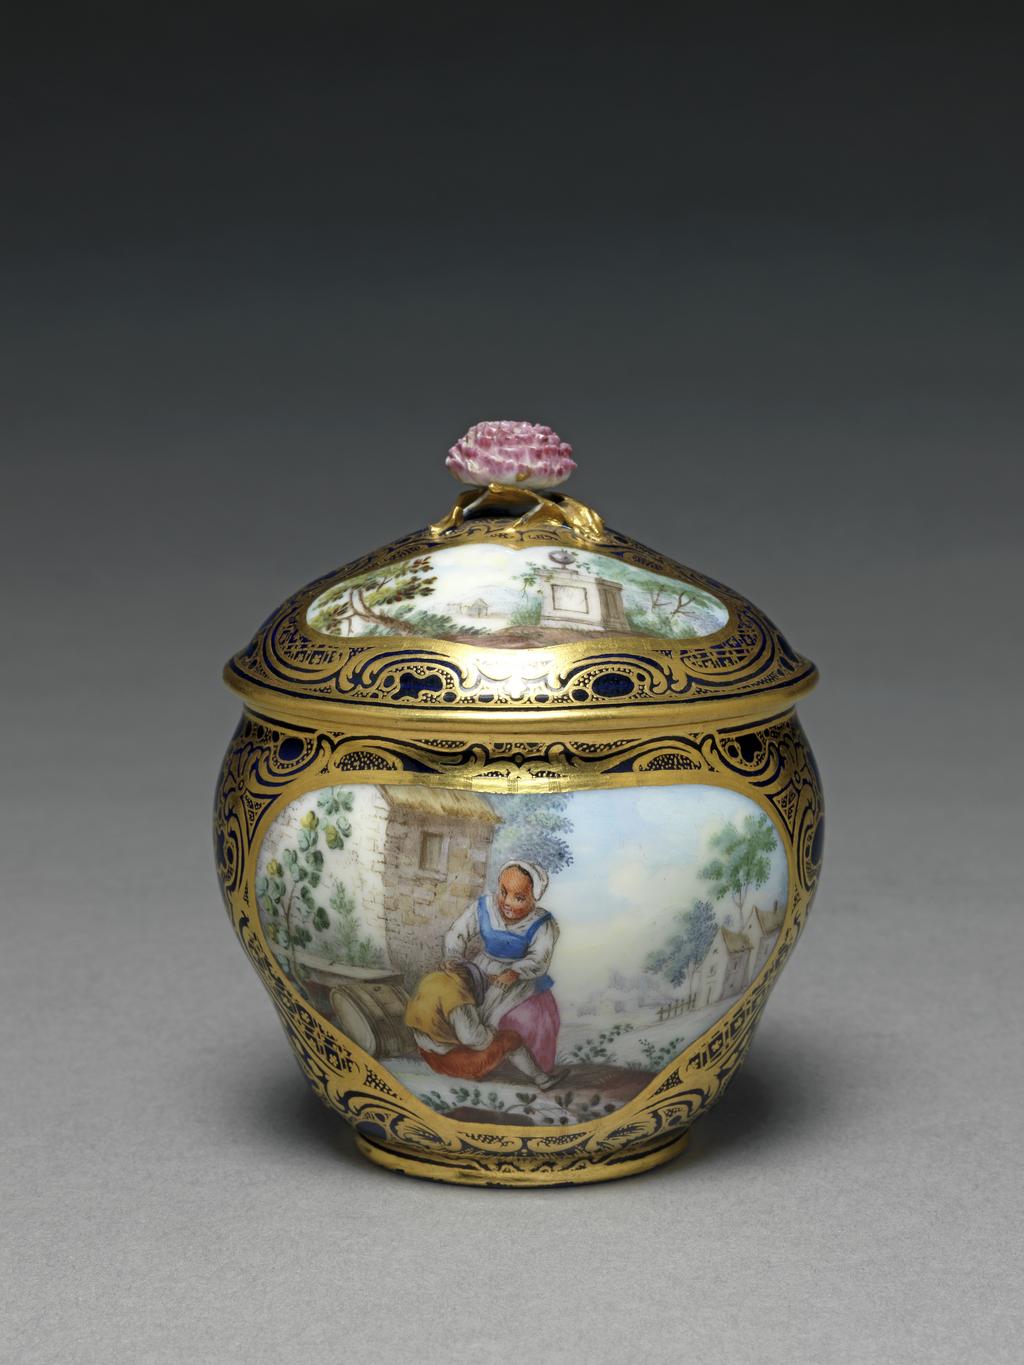 An image of Sugar basin and cover/Pot à sucre Hébert from a dejeuner. Sèvres Porcelain Manufactory. Vielliard, André-Vincent (French, 1717-90, act.1752-1790). Soft-paste porcelain decorated with an underglaze bleu lapis ground, painting overglaze in blue, several shades of green yellow, pink, red, pale purple, pale and dark brown enamels, and gilding. The basin bears the date letter for 1759 but the object may have been made in 1760. French. Rococo.